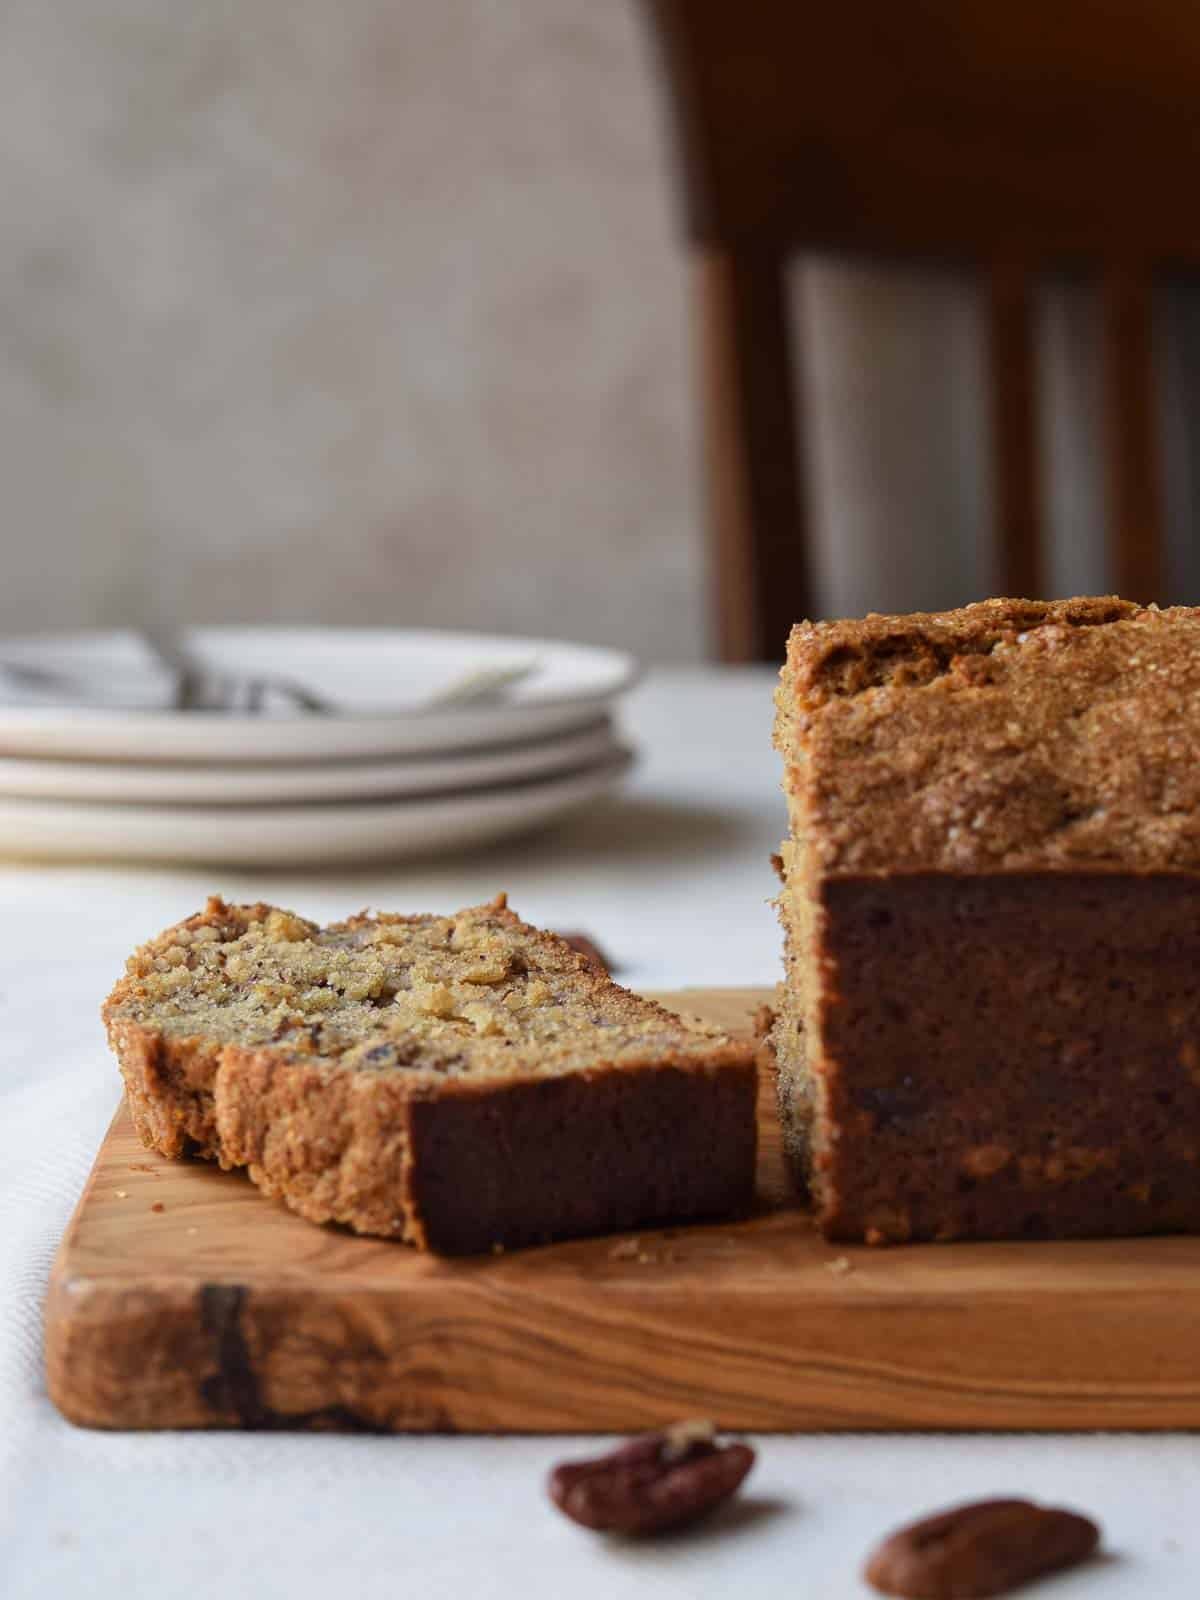 A slice of banana bread cut from a loaf on a kitchen table.